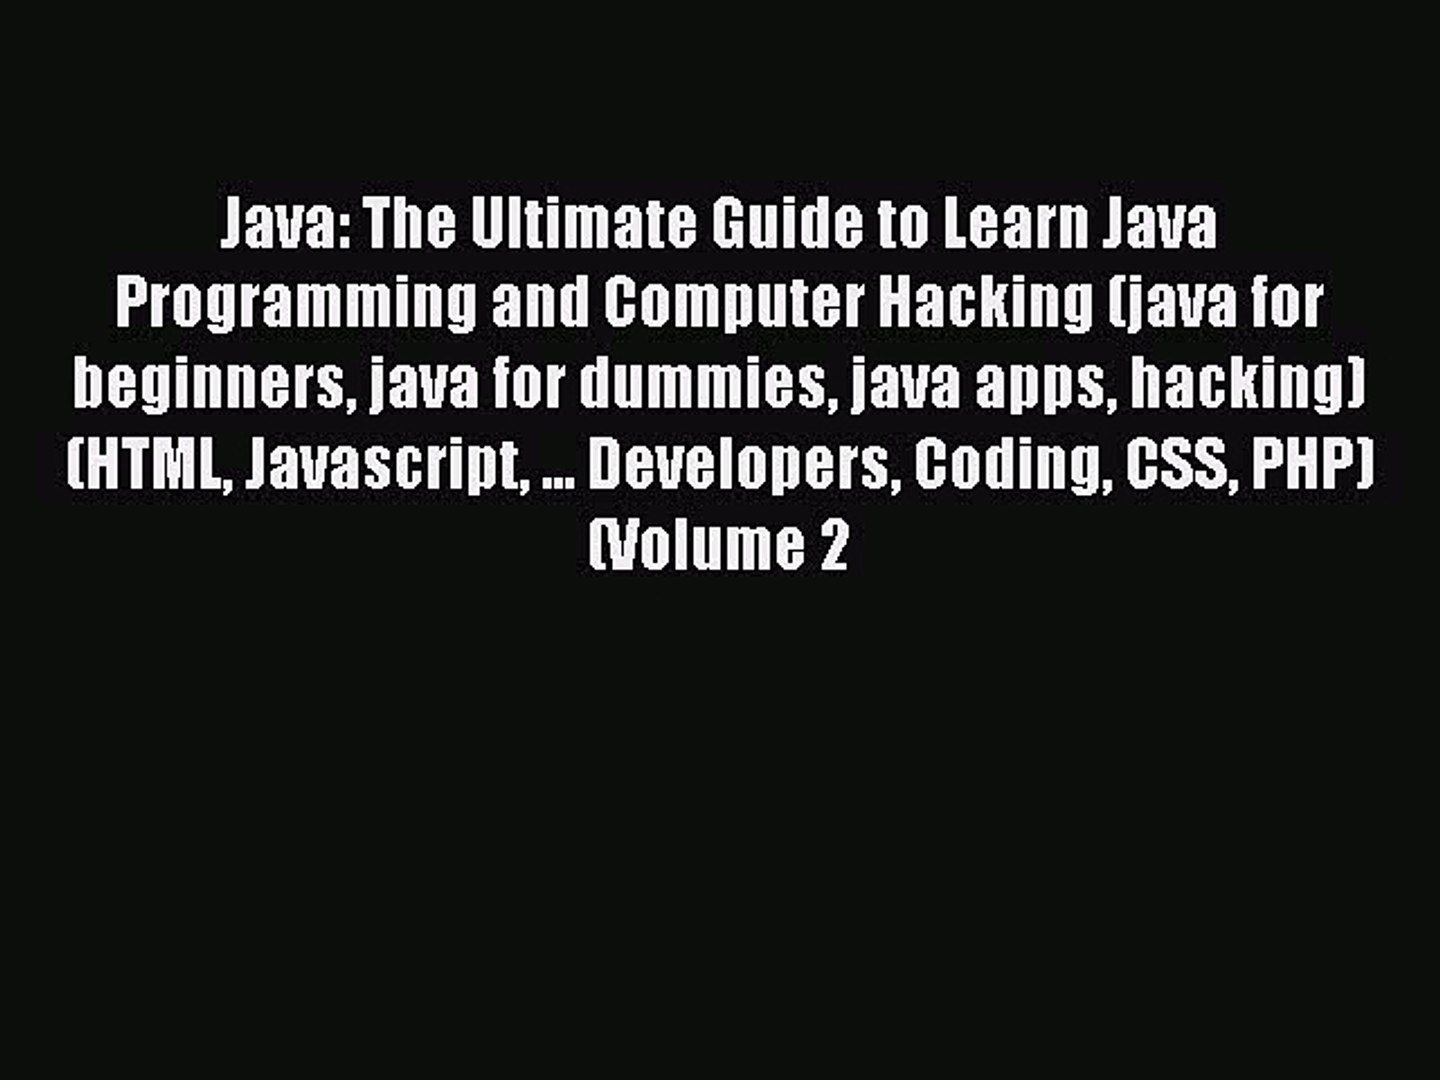 Download Java: The Ultimate Guide to Learn Java Programming and Computer Hacking (java for